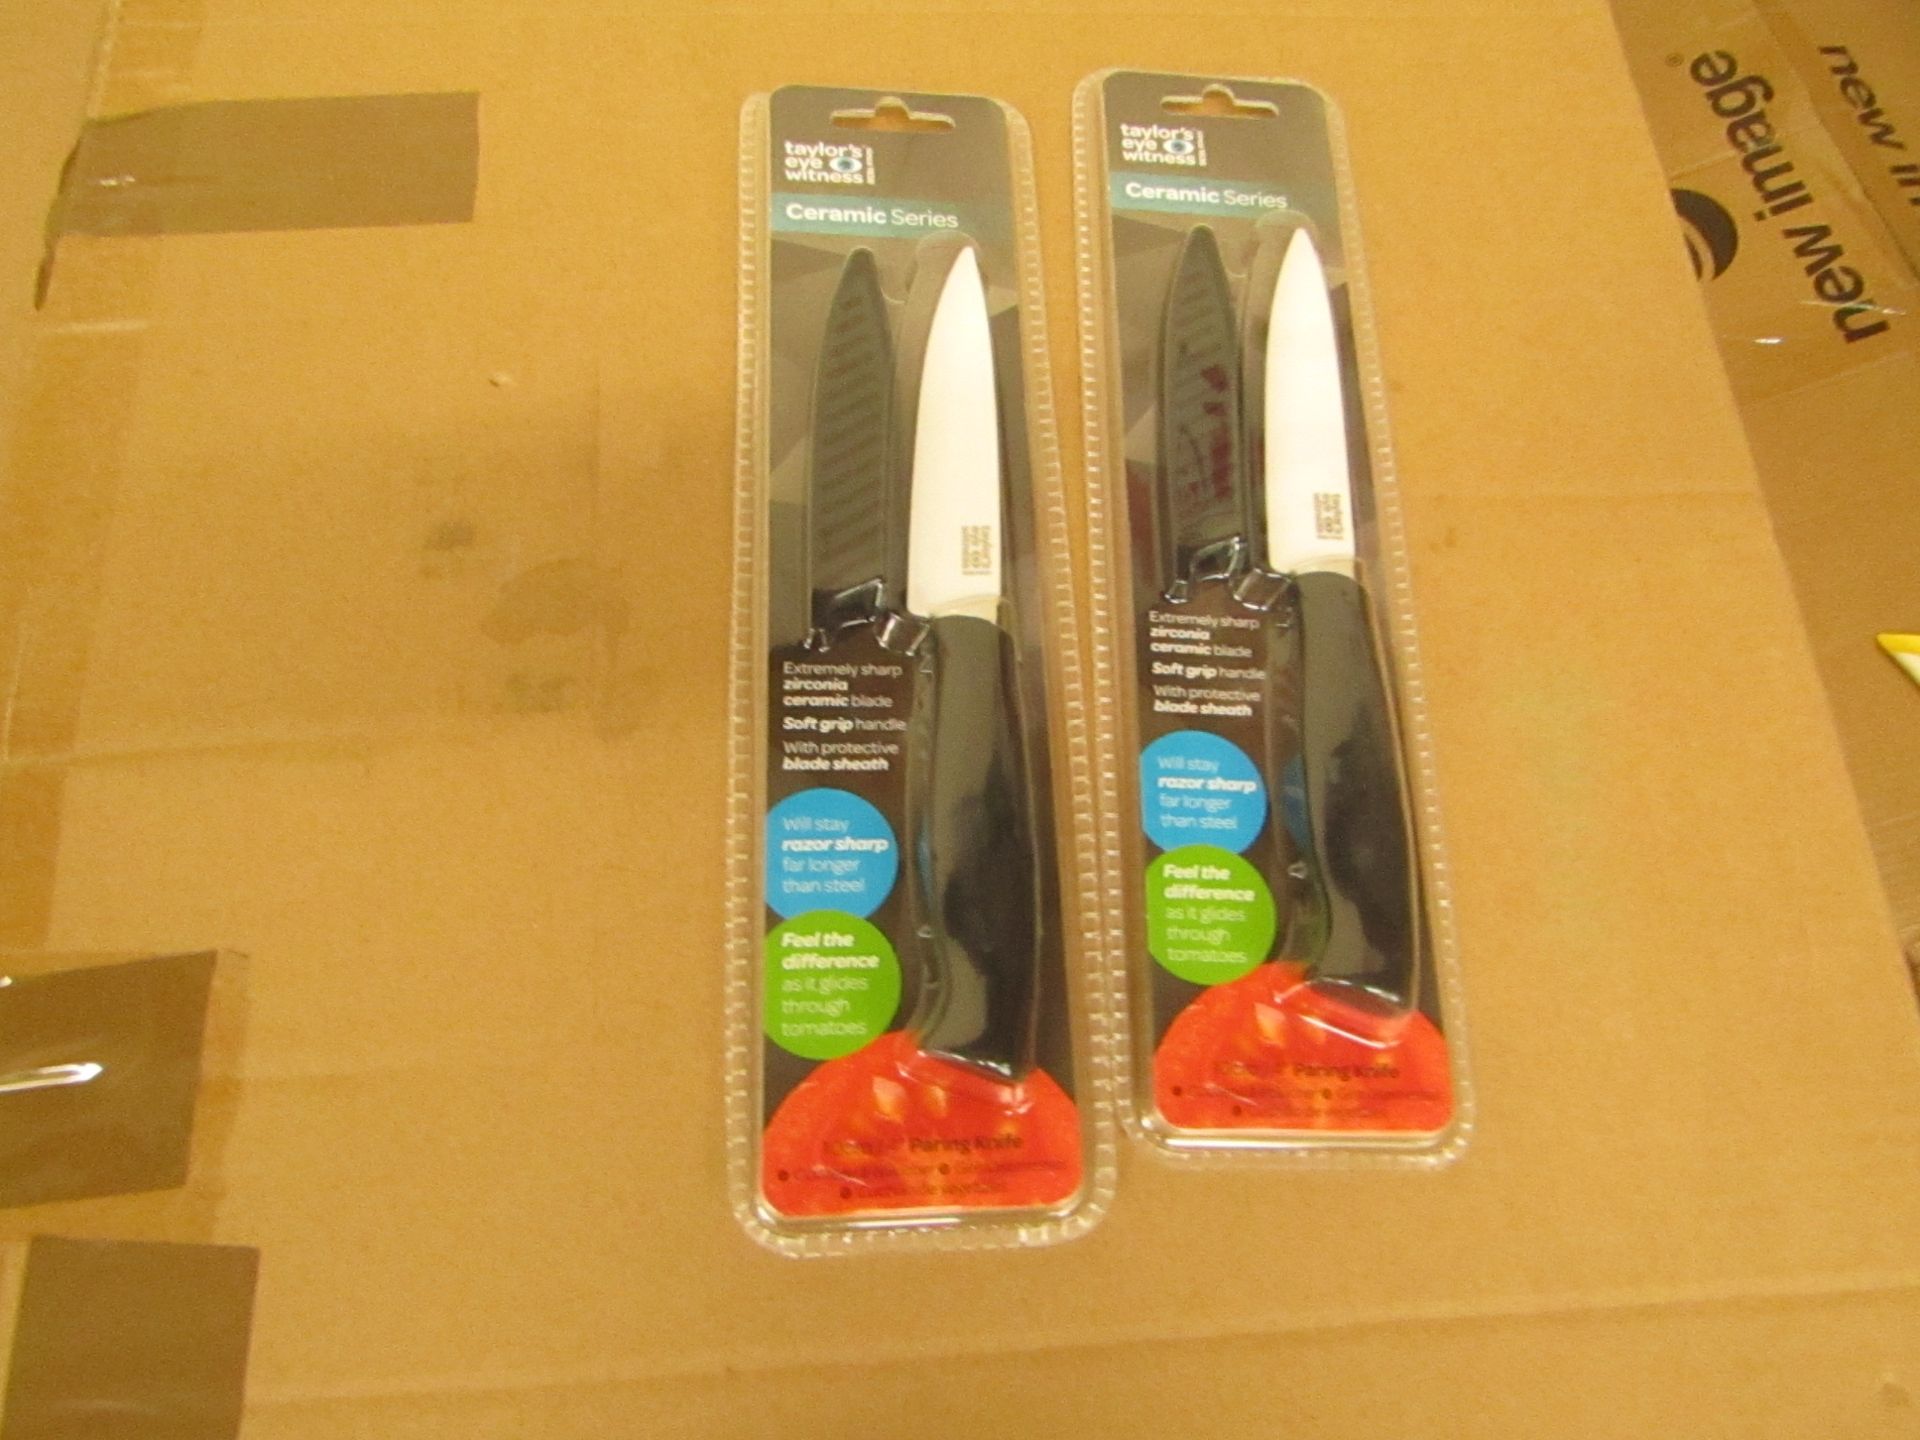 2x Taylors Eye Witness 4" ceramic pairing knives, new and packaged.